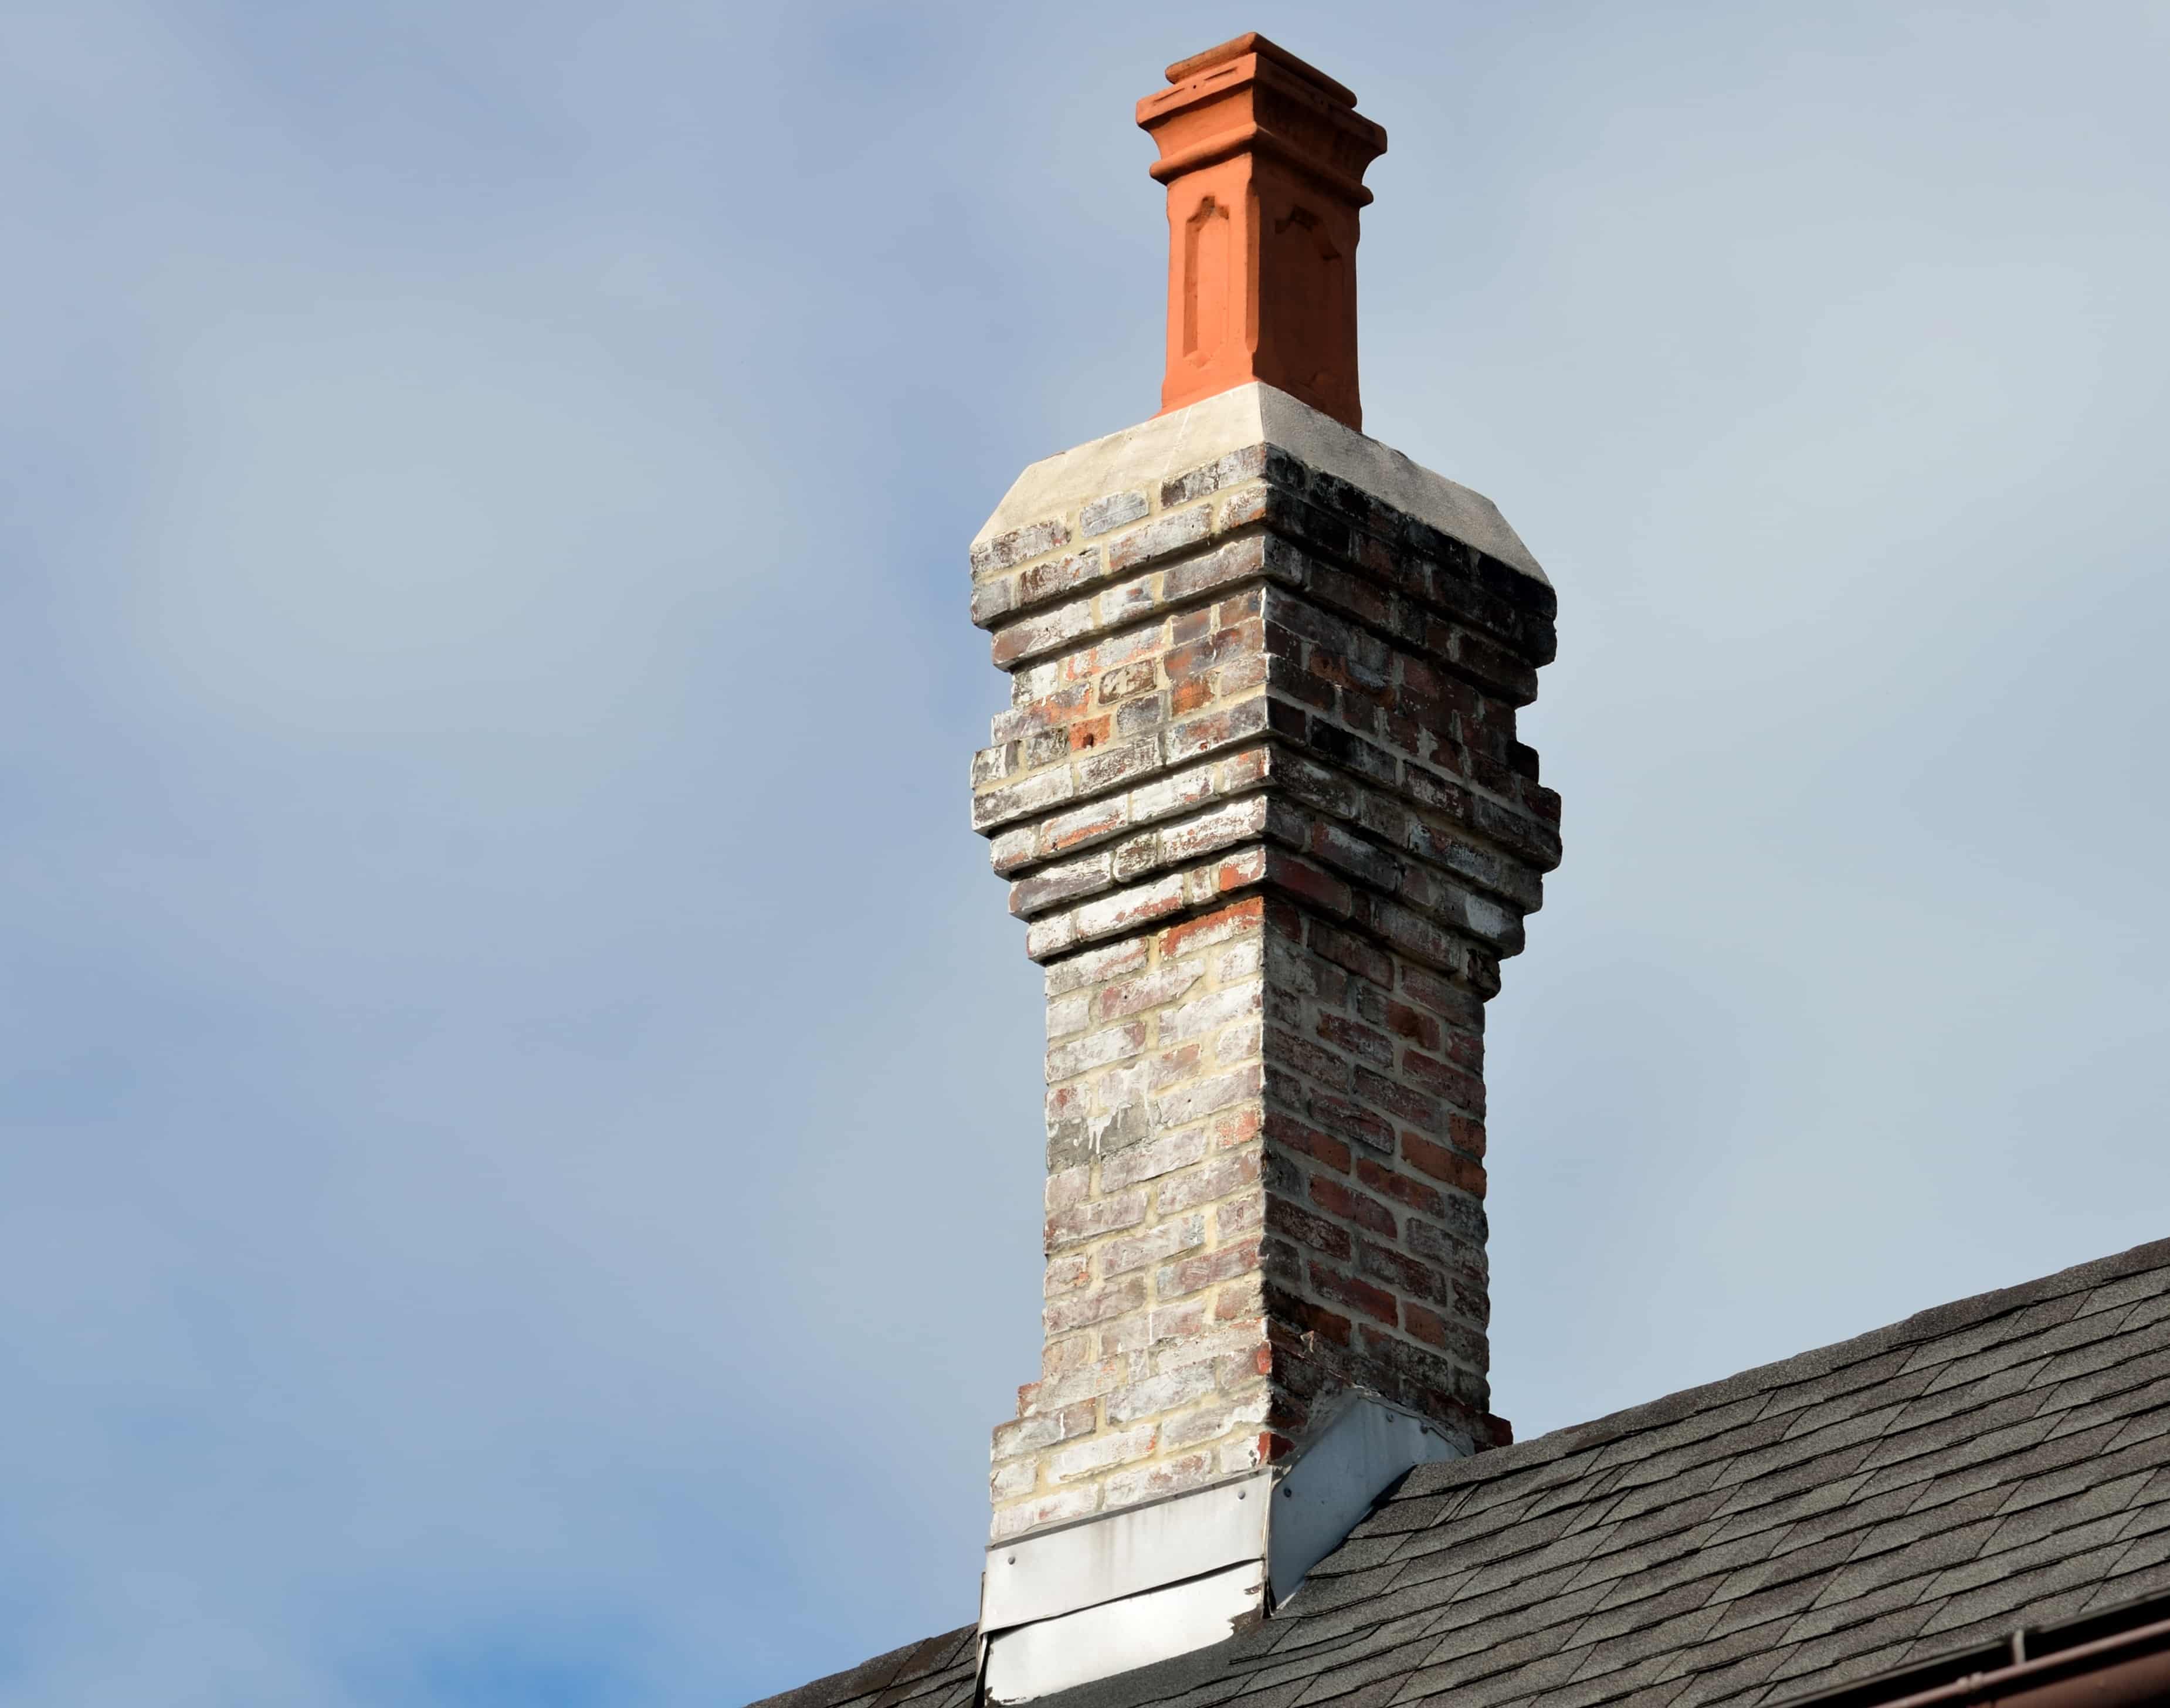 How tall should my chimney be?